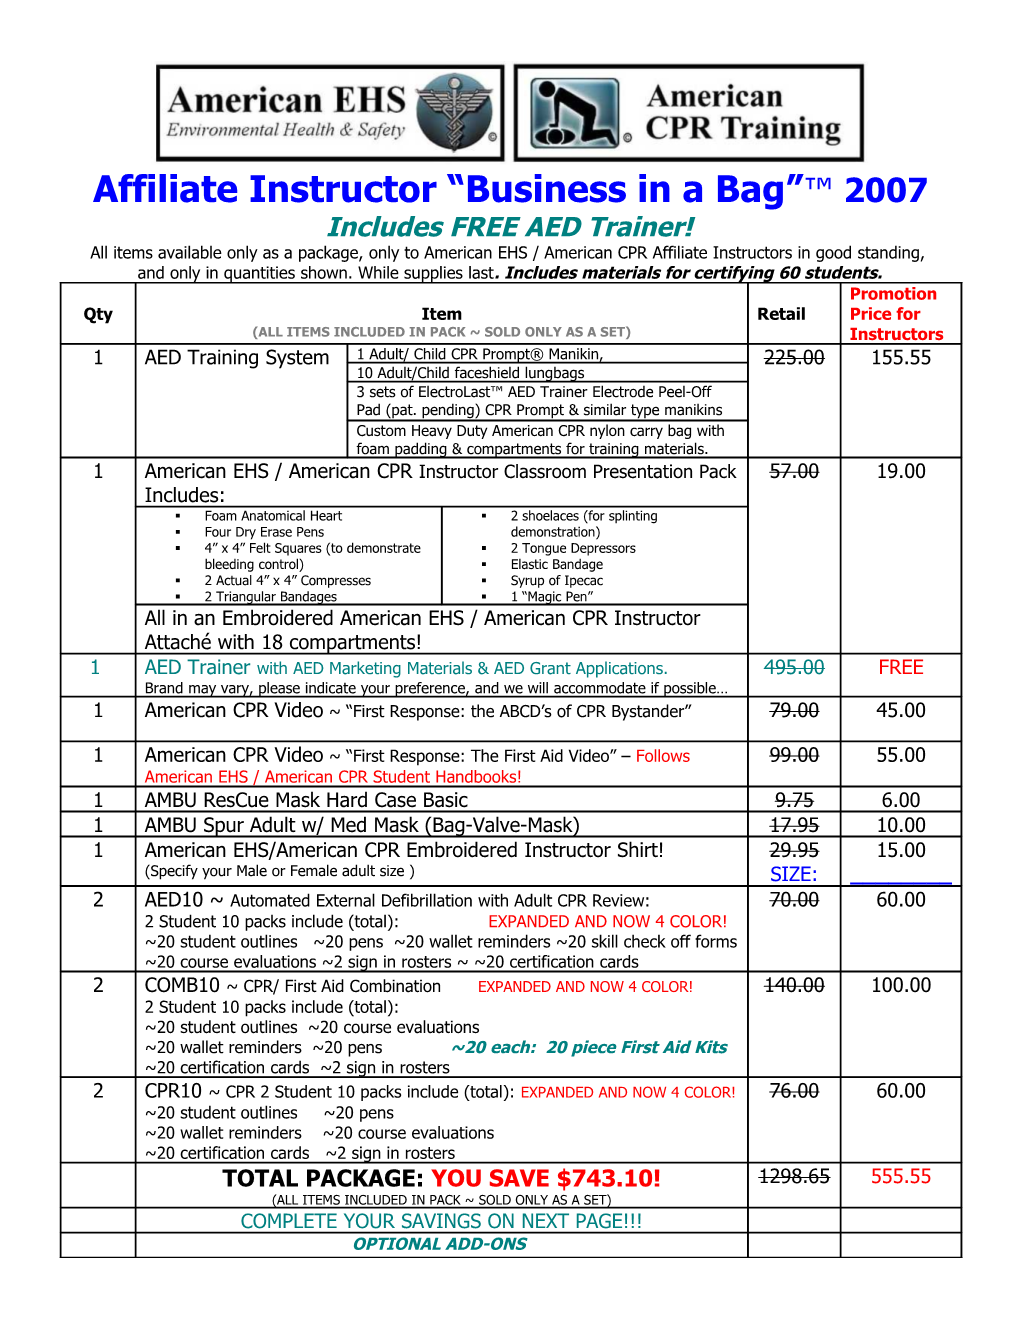 Affiliate Instructor Business in a Bag 2007